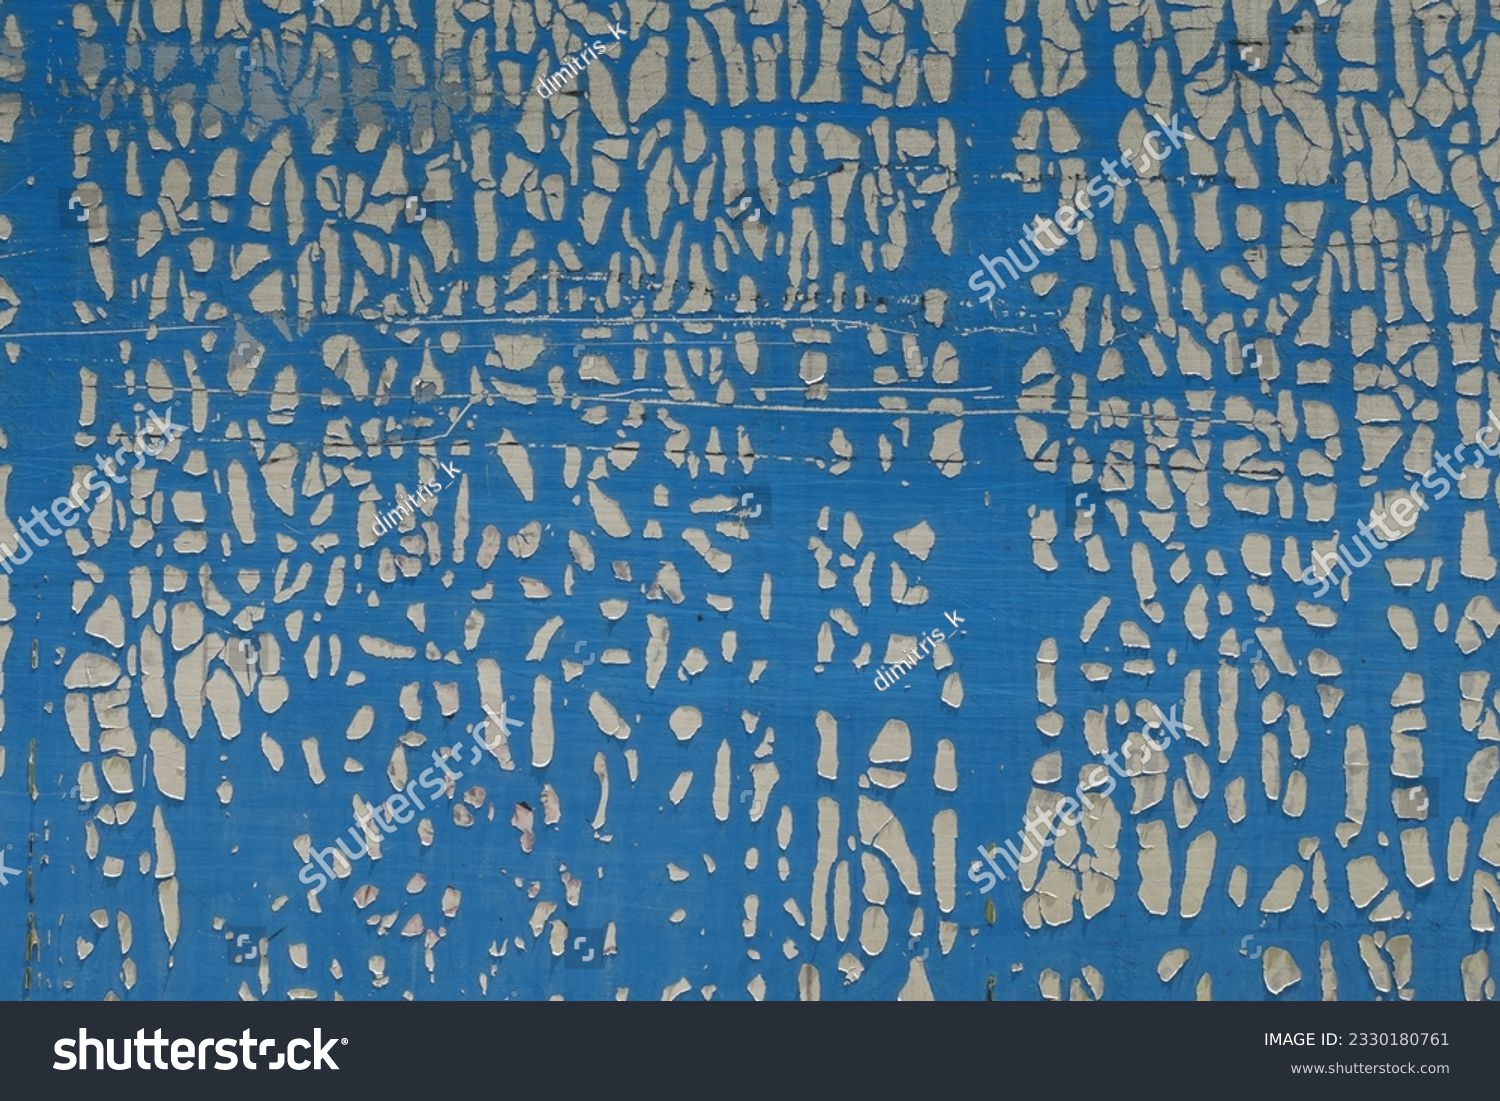 Cracked and weathered plastic wrap on metal surface. Abstract shapes grungy background. #2330180761